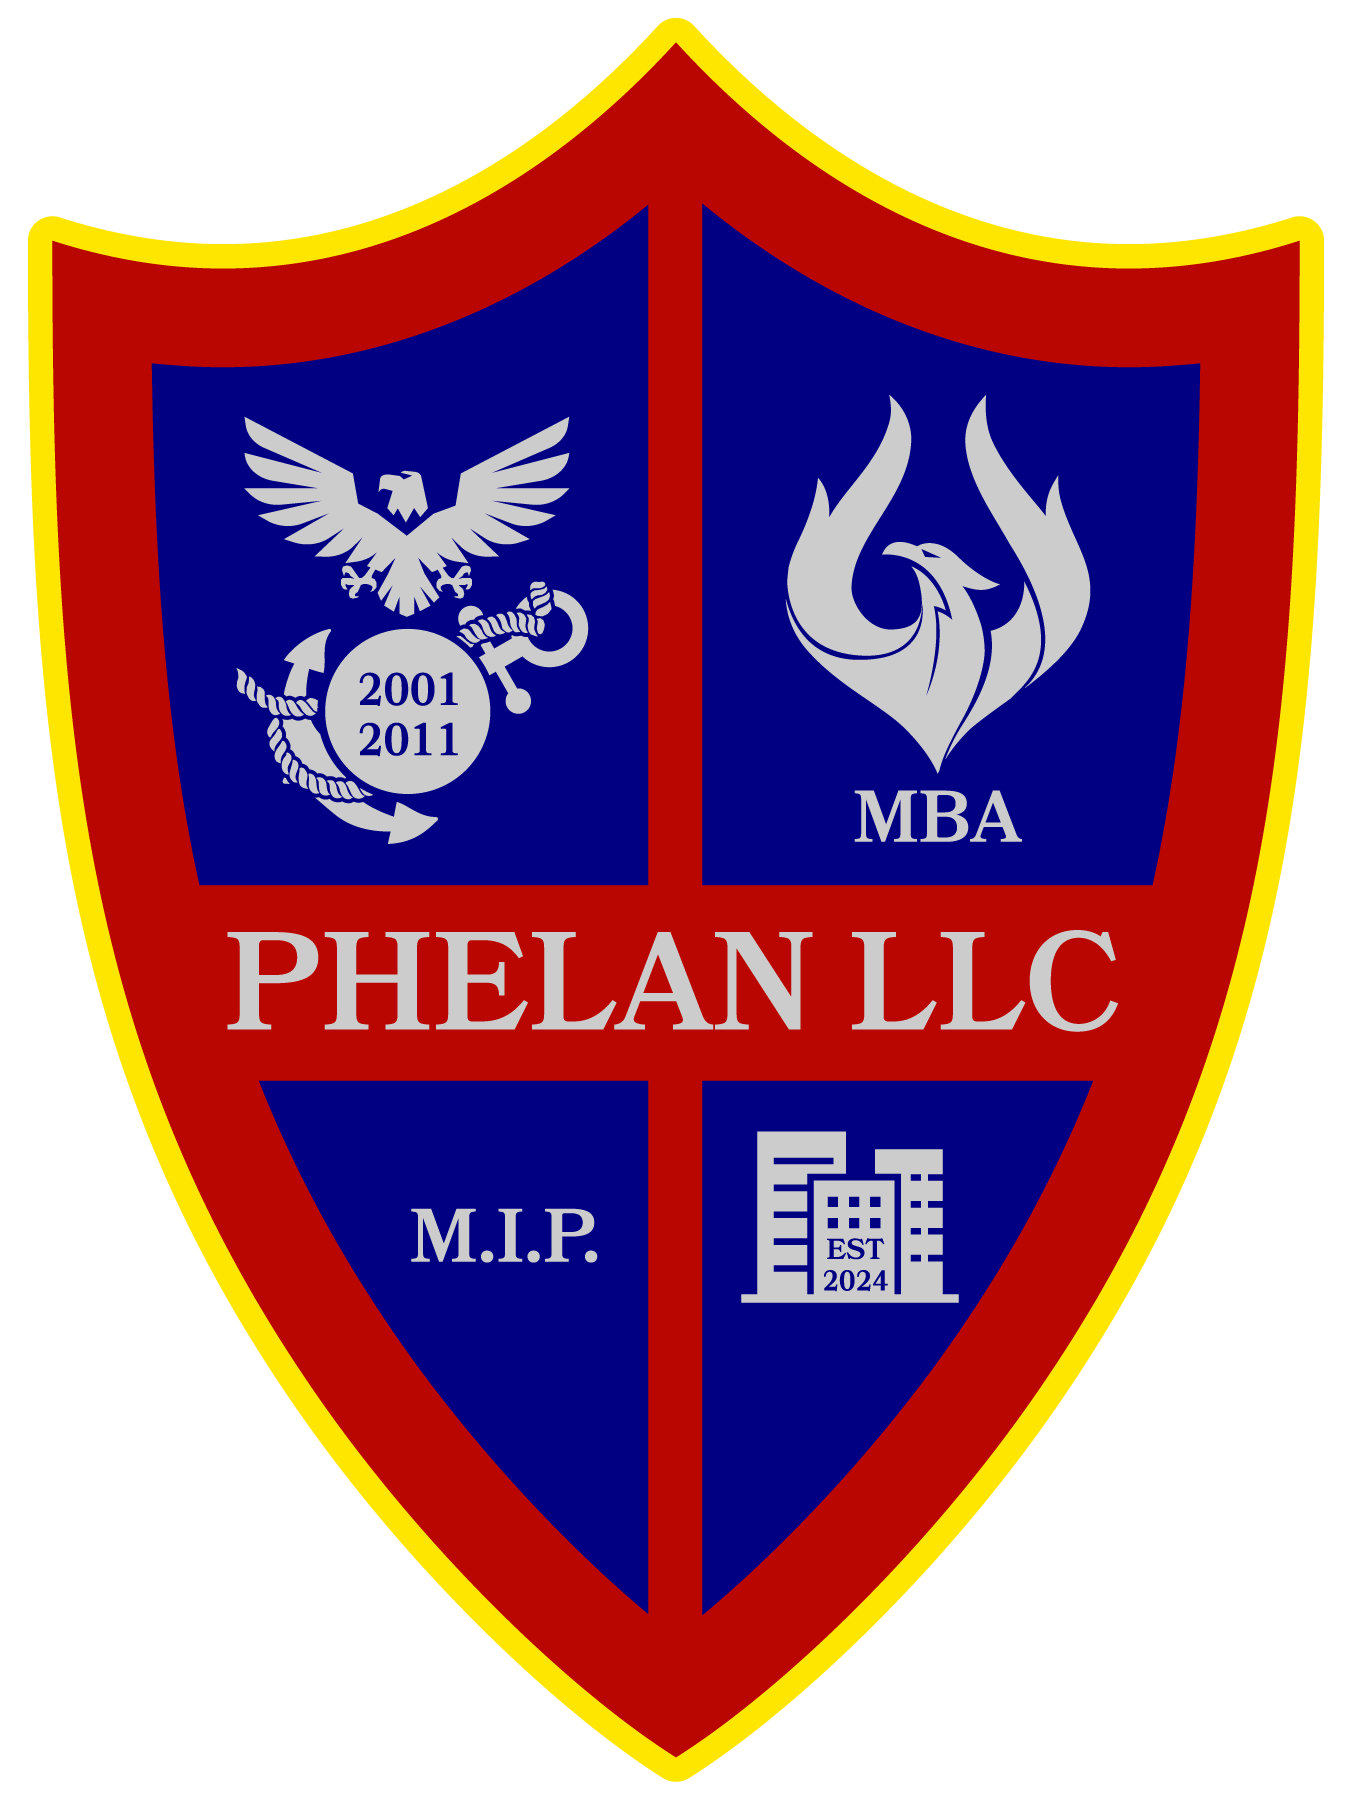 A red and blue shield with the words phelan llc on it.